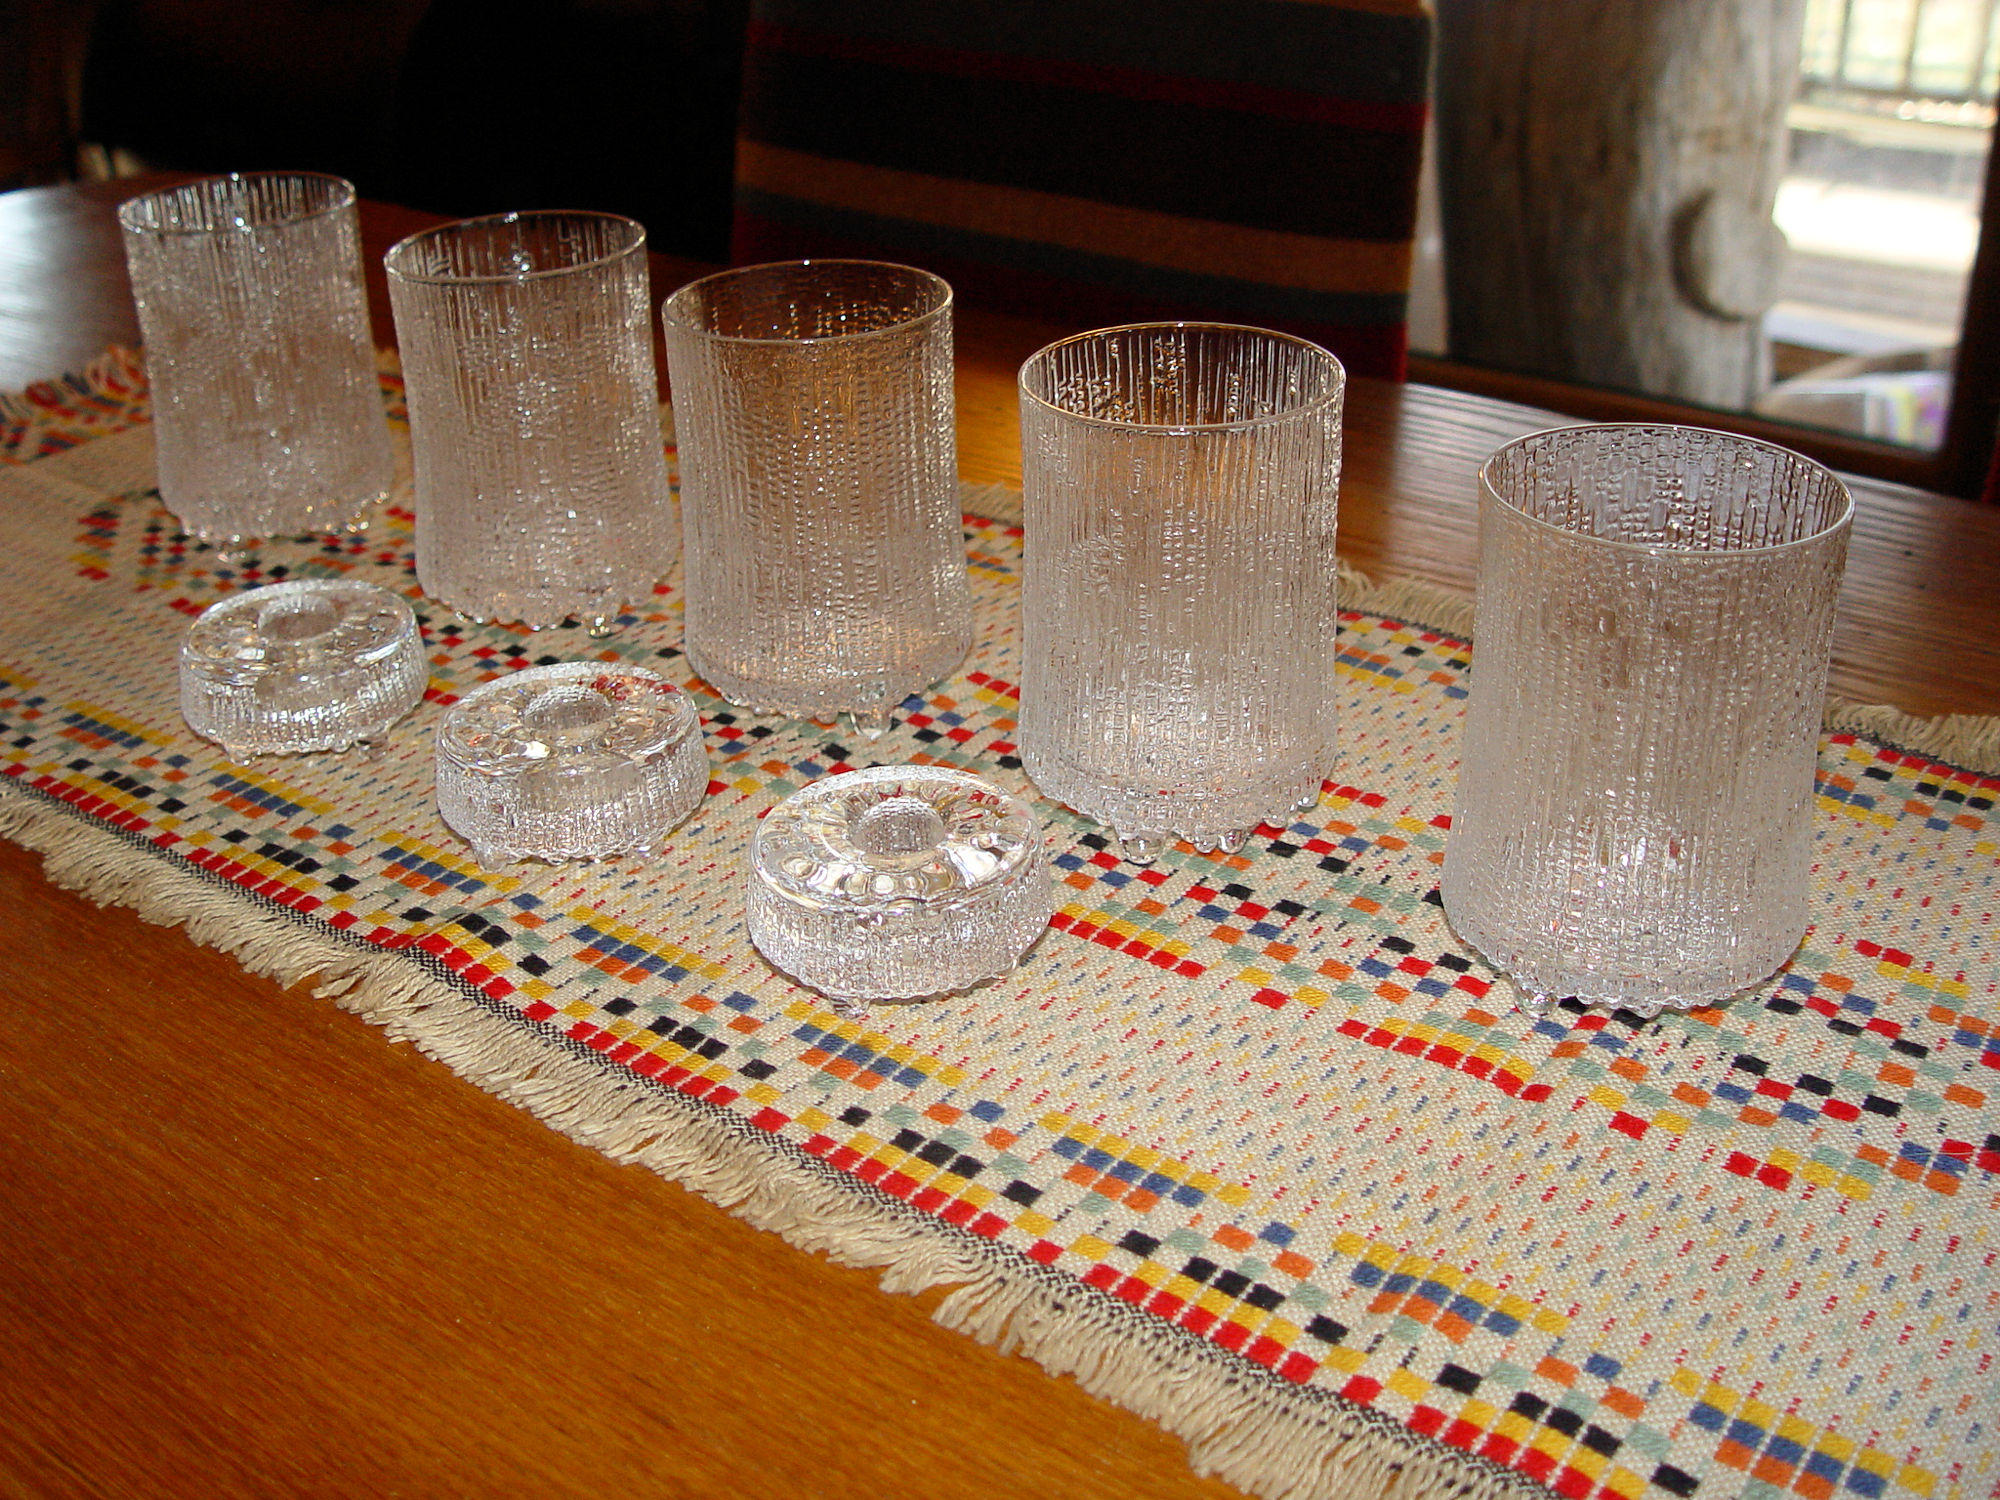 Large Scandinavian Set
                                          littala Ultima Thule Footed
                                          Highball Glasses & Taper
                                          Candle Holders